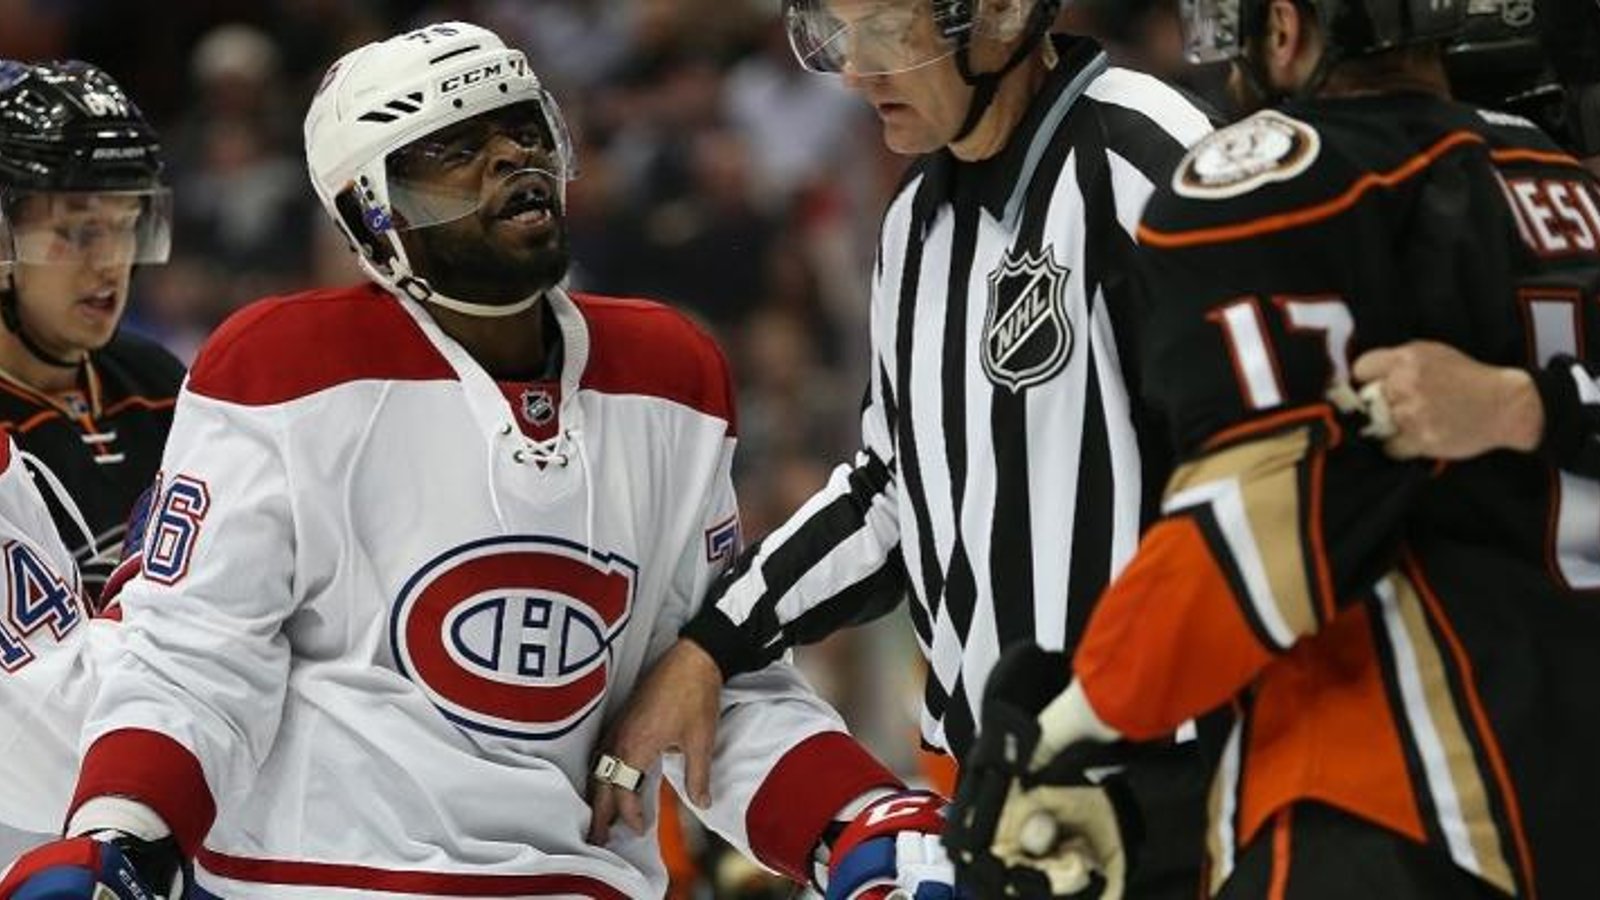 Rumor: P.K. Subban has played his last game in Montreal.